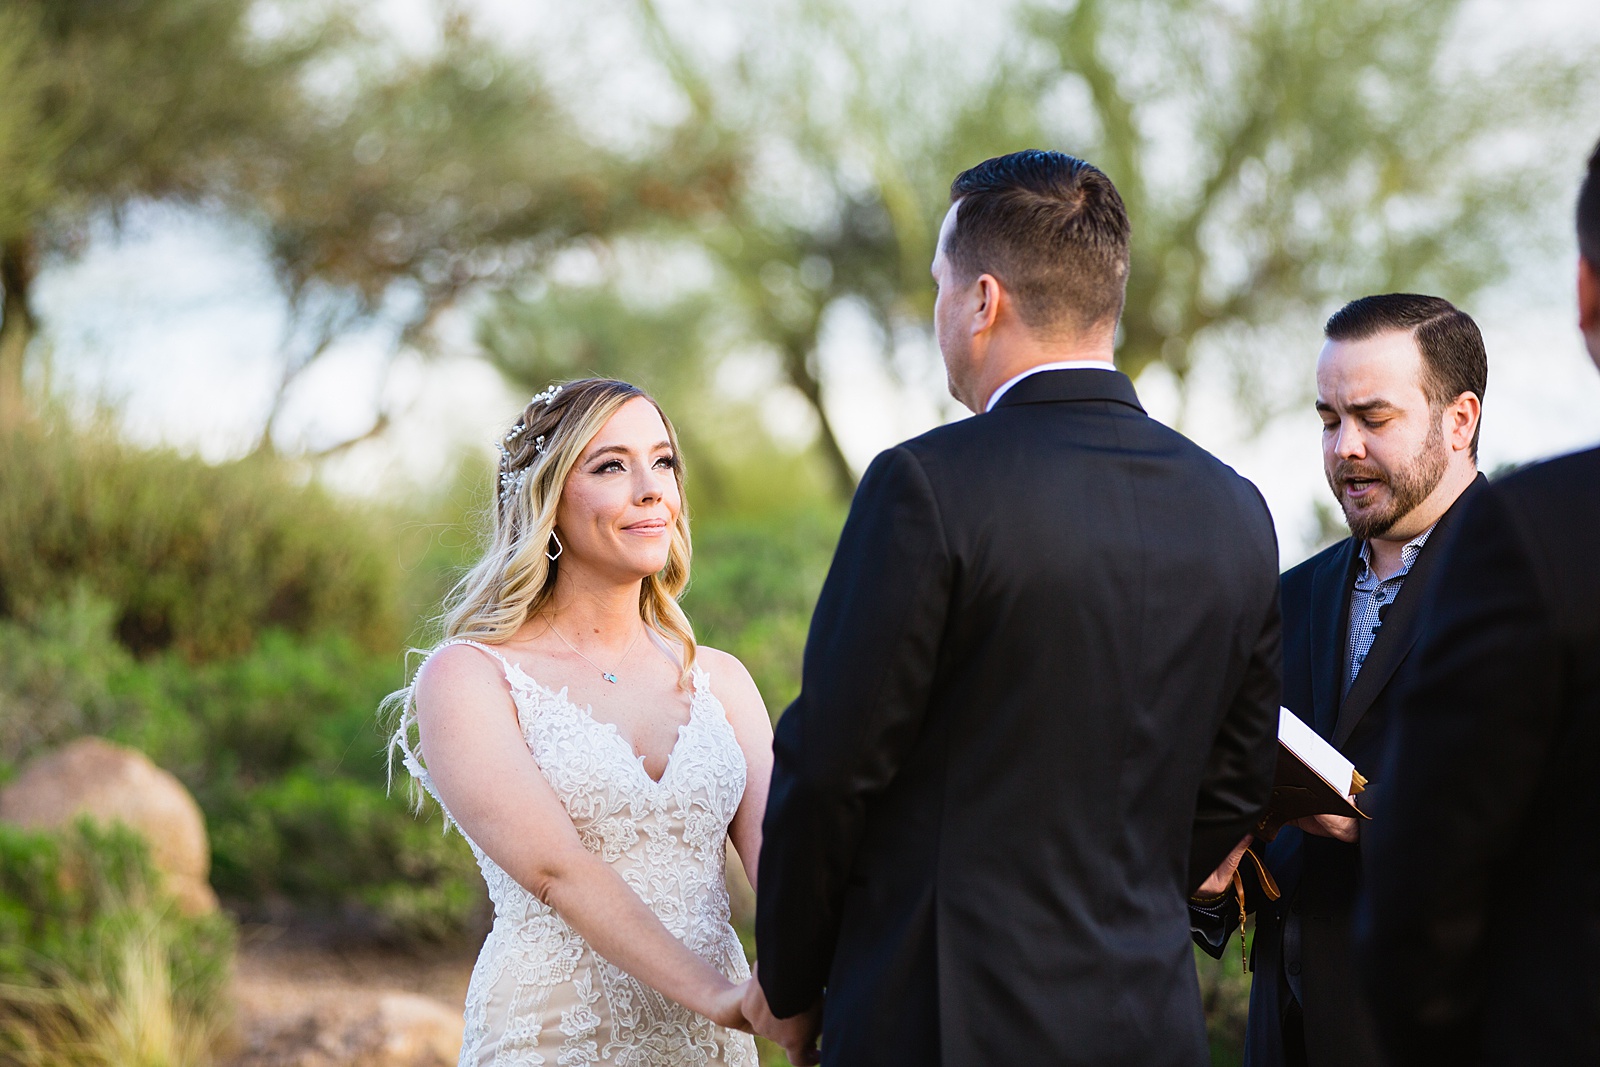 Bride looking at her groom during their wedding ceremony at Troon North by Scottsdale wedding photographer PMA Photography.